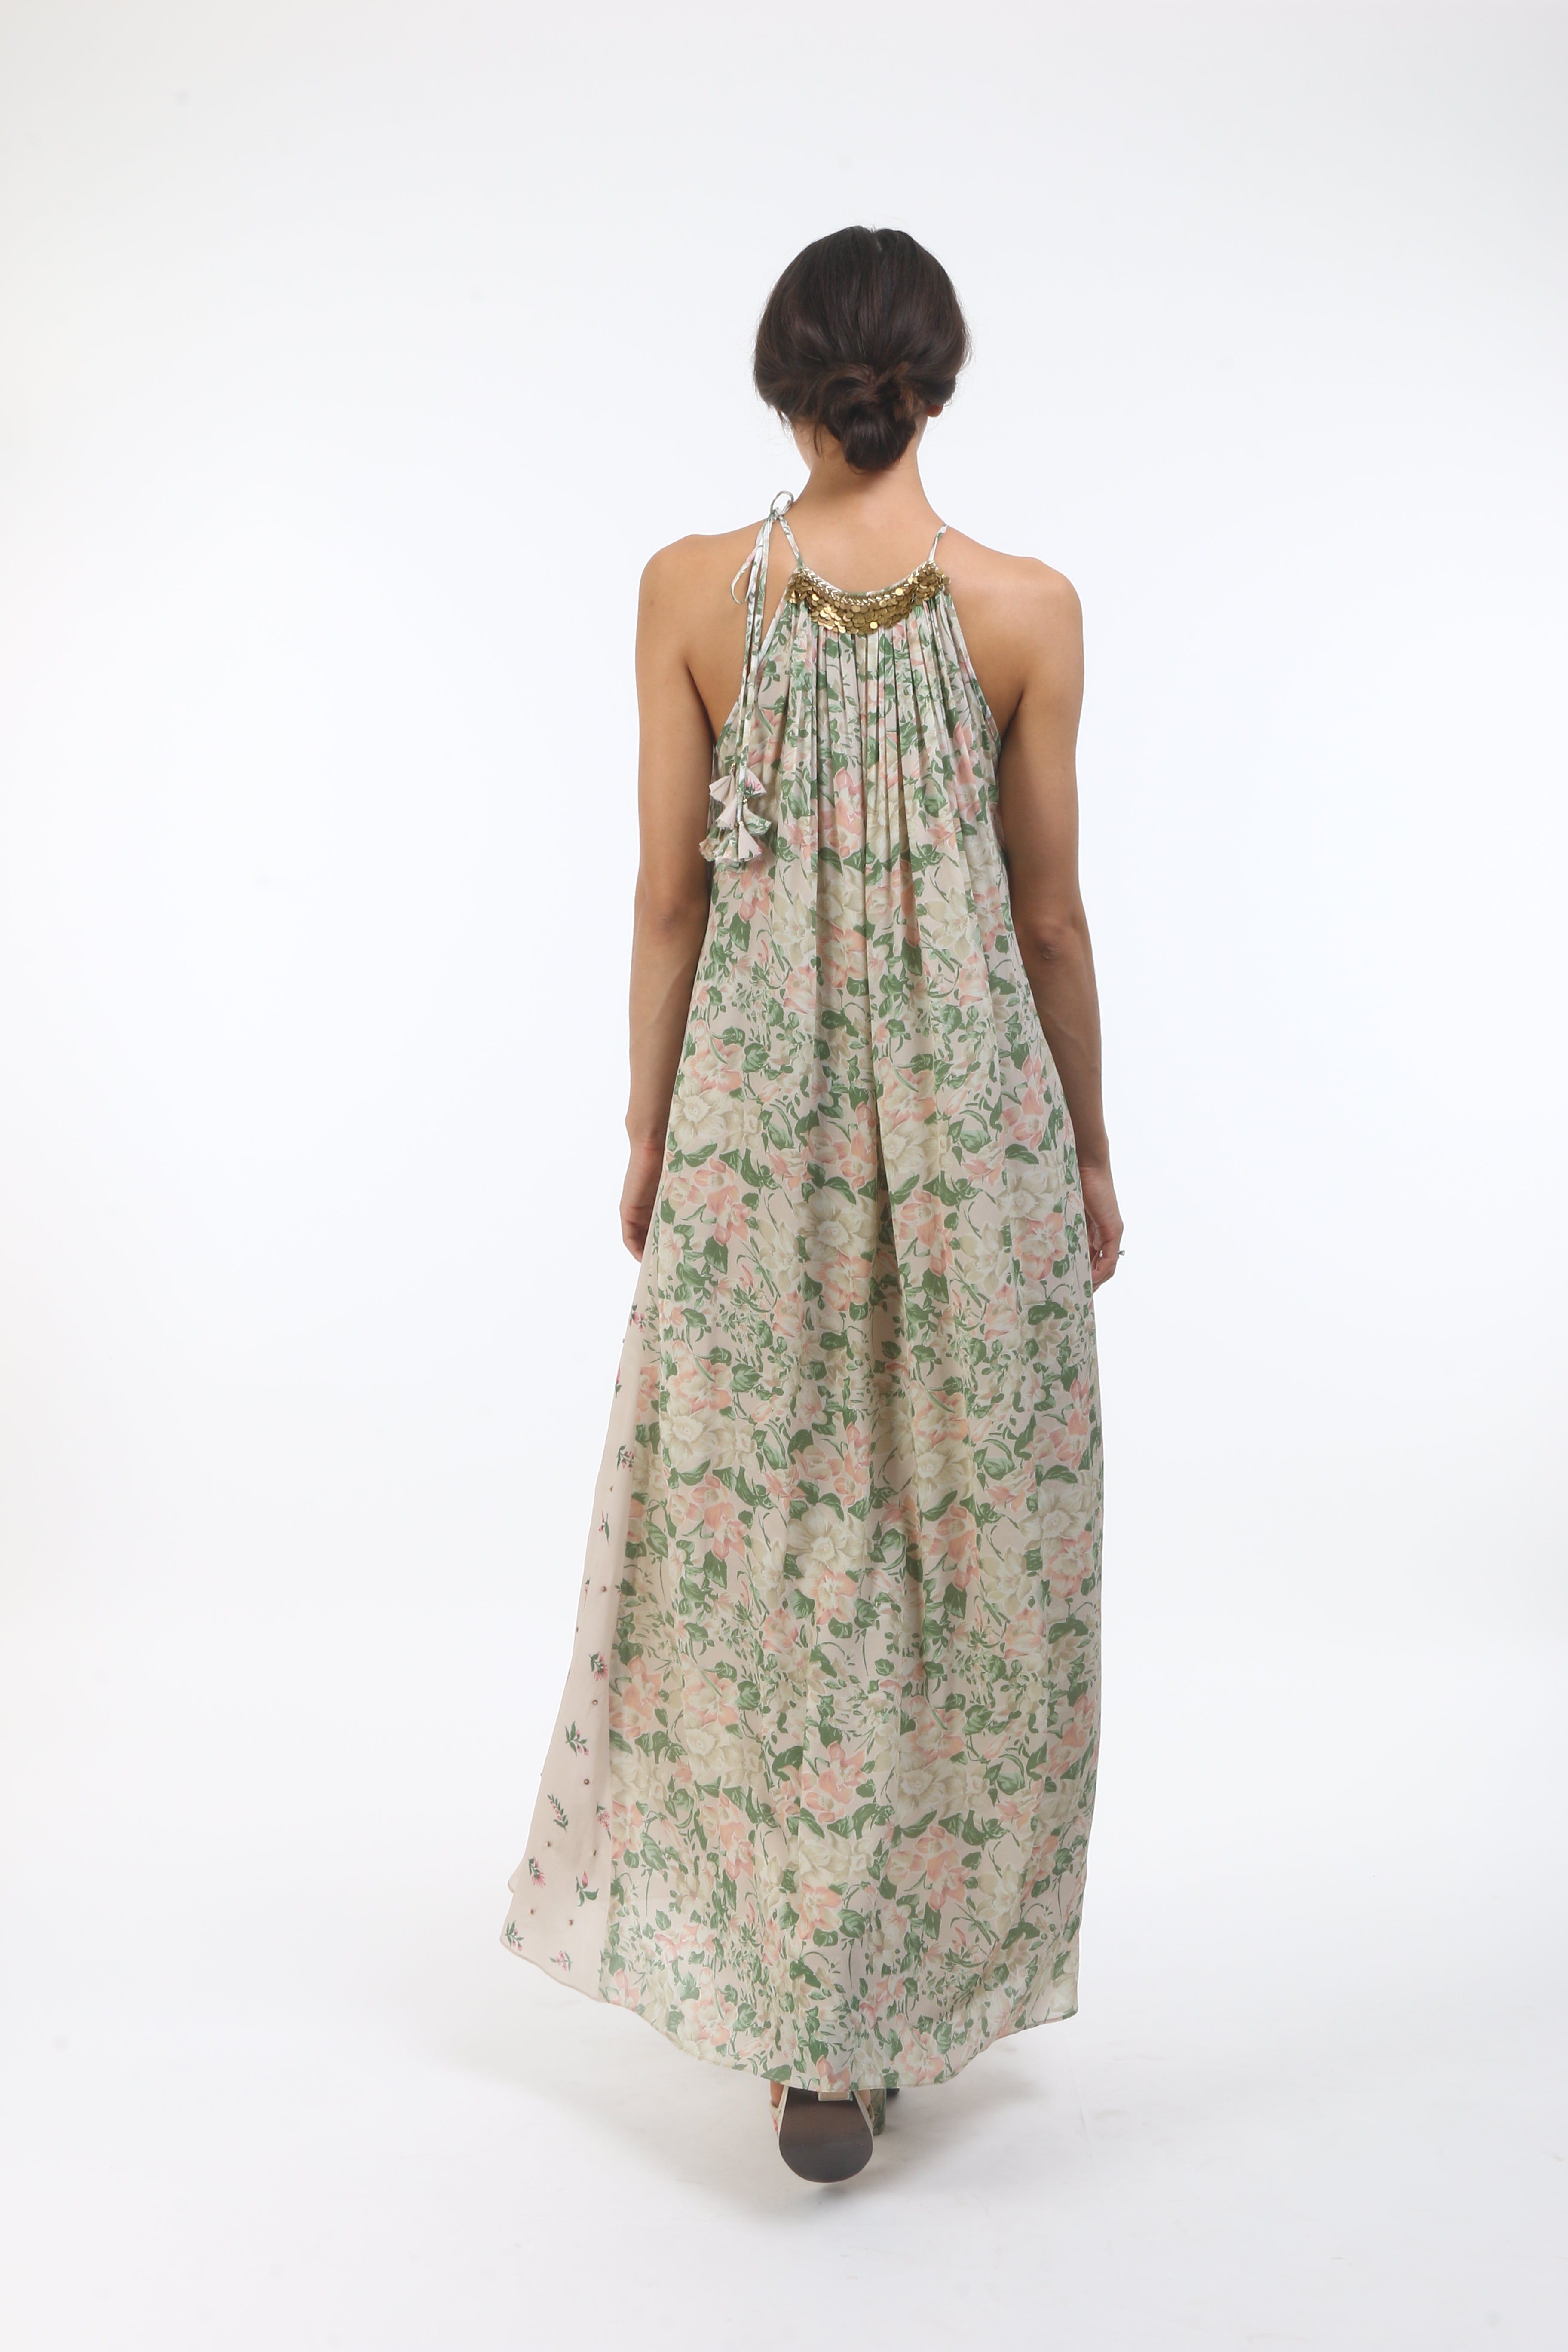 Bloom antique jade bibi jaal printed halter dress in crepe, with bouquet side godet’s and layered coin embroidered neckline.